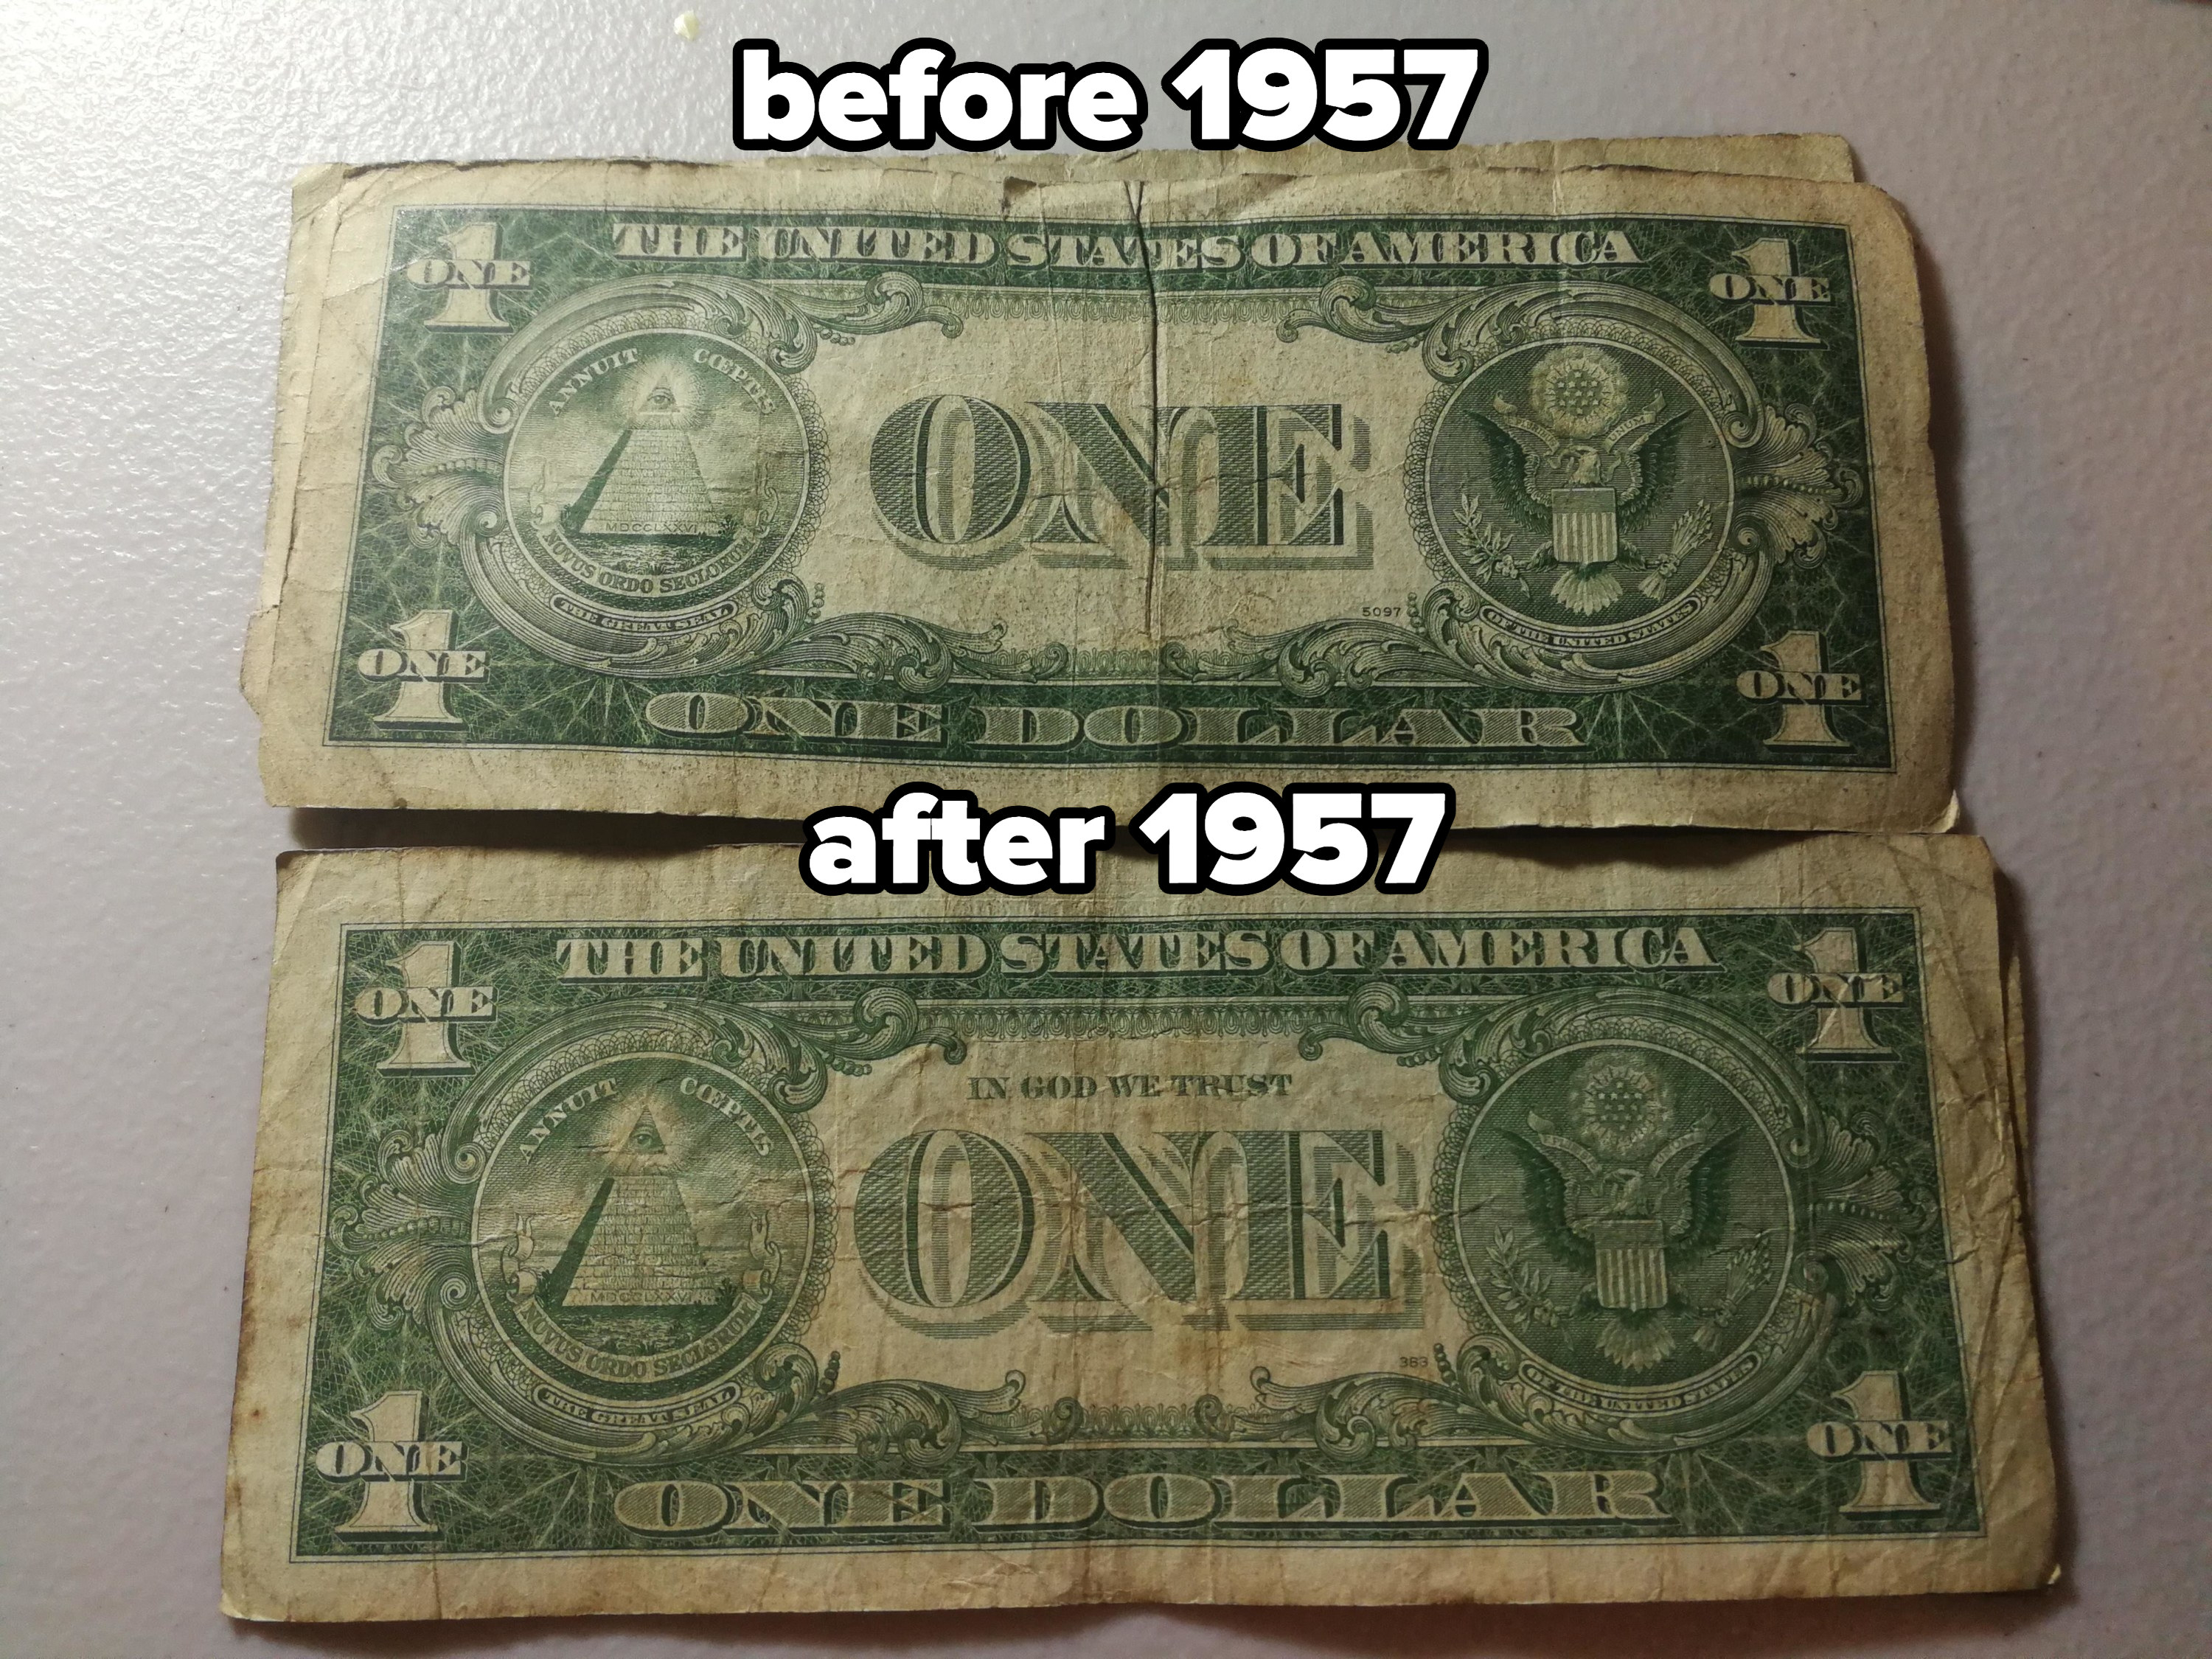 Dollar bills before and after 1957